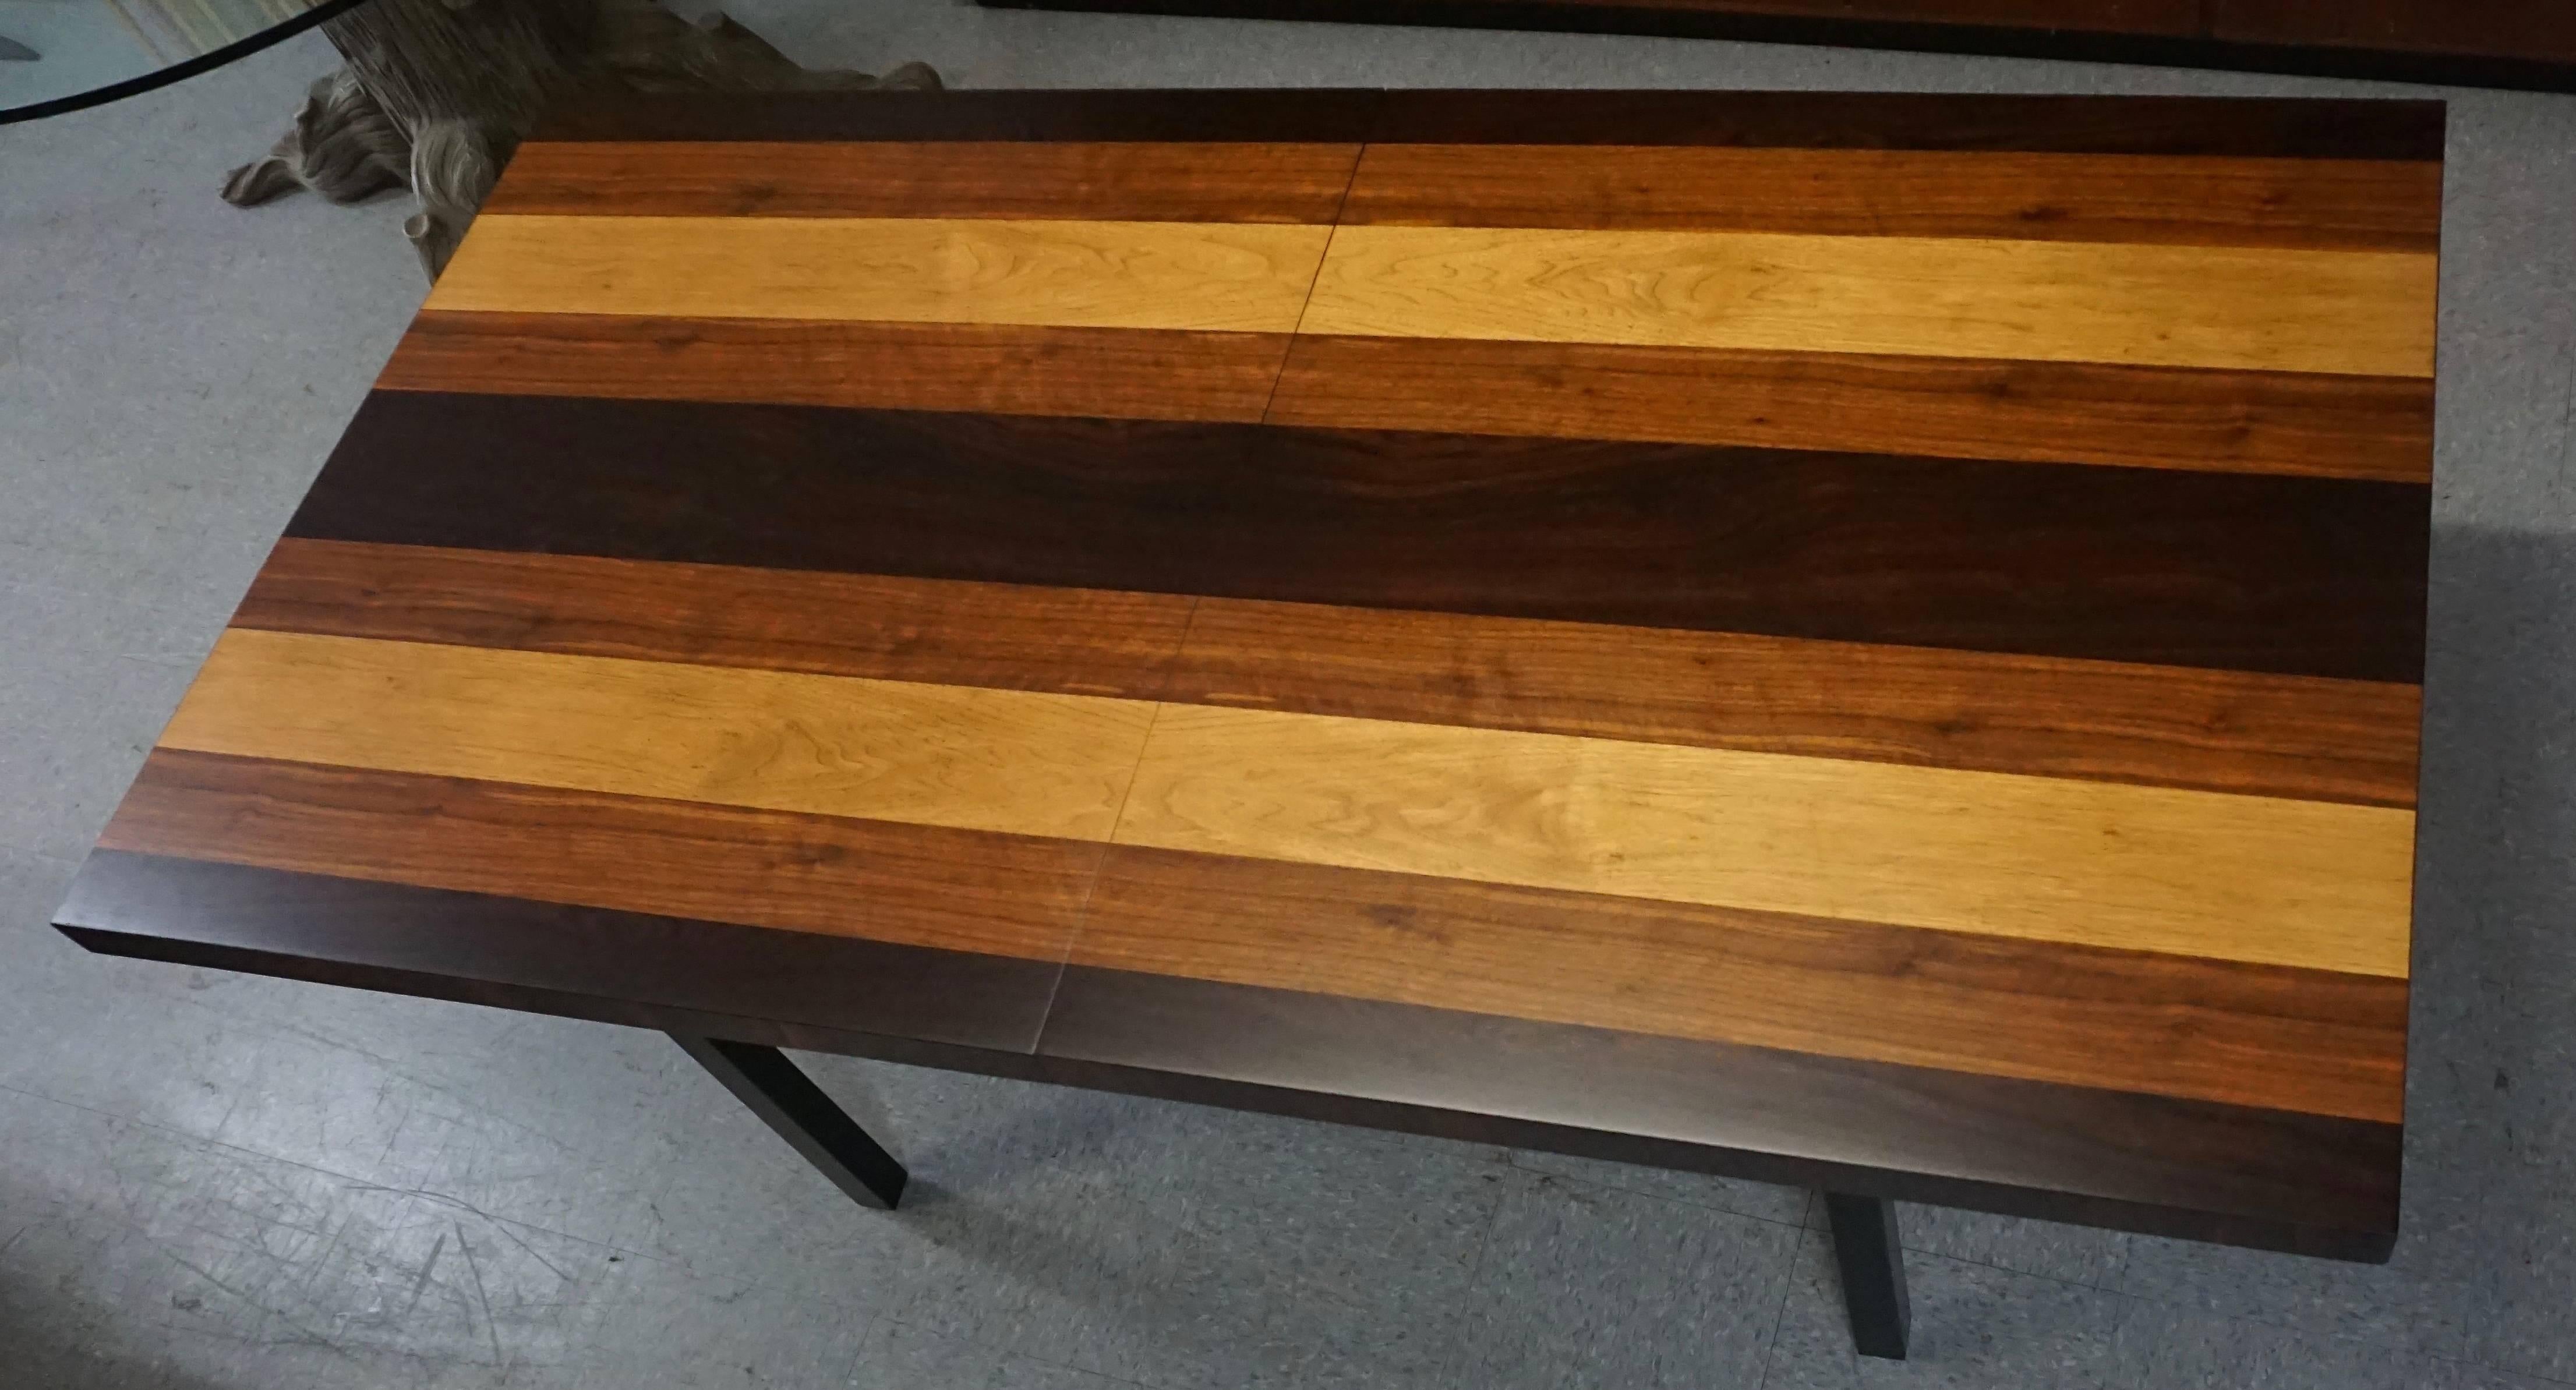 Restored. This table has very strong and bright veneer colors. New black lacquer on the legs. There are a few marks underneath new surface, but not very noticeable. One center leaf measures 20 inches, which makes the table a total of 90 inches long